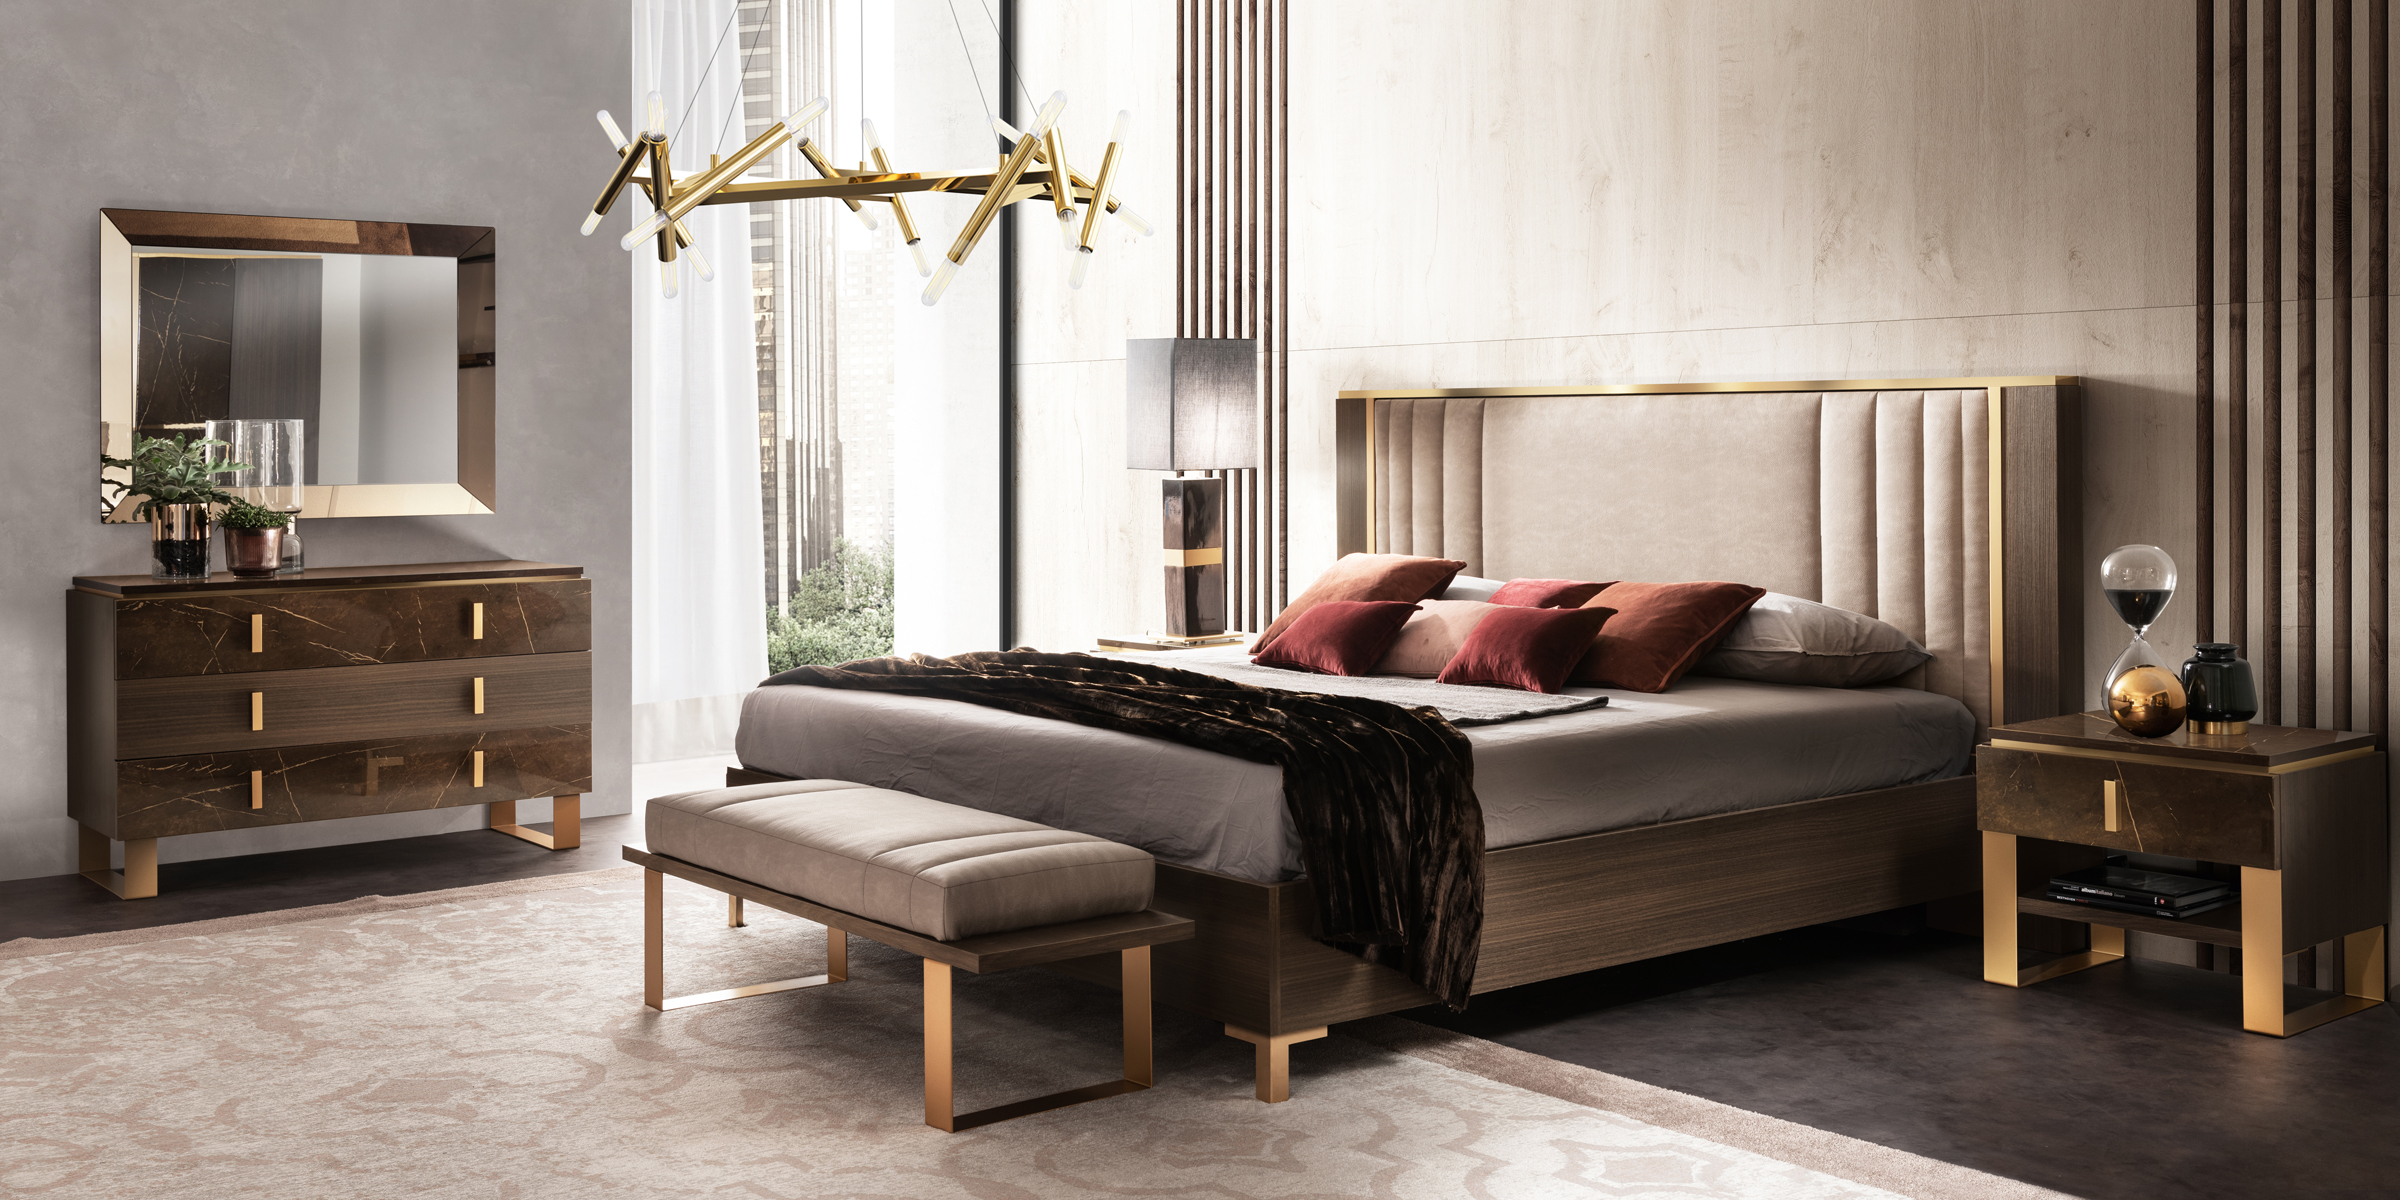 Bedroom Furniture Beds Essenza Bedroom by Arredoclassic, Italy Additional